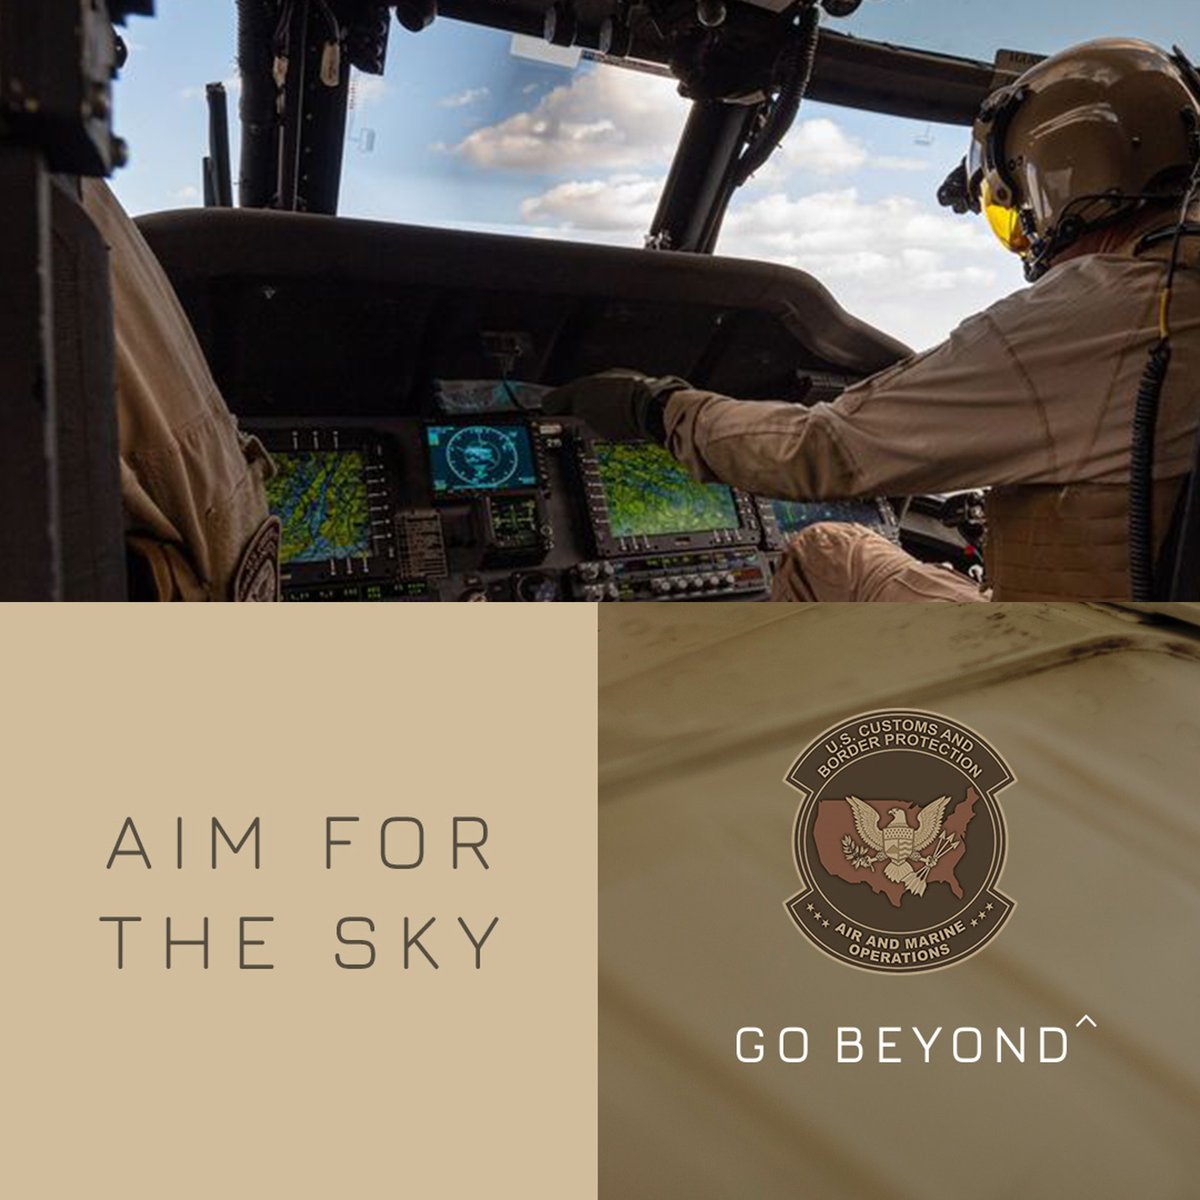 Reach new heights with Air and Marine Operations (AMO).

From intercepting smugglers to safeguarding our borders, AMO plays a pivotal role in ensuring national security.

Ready to soar? Join today: go.dhs.gov/JZr

#CBPCareers #NowHiring